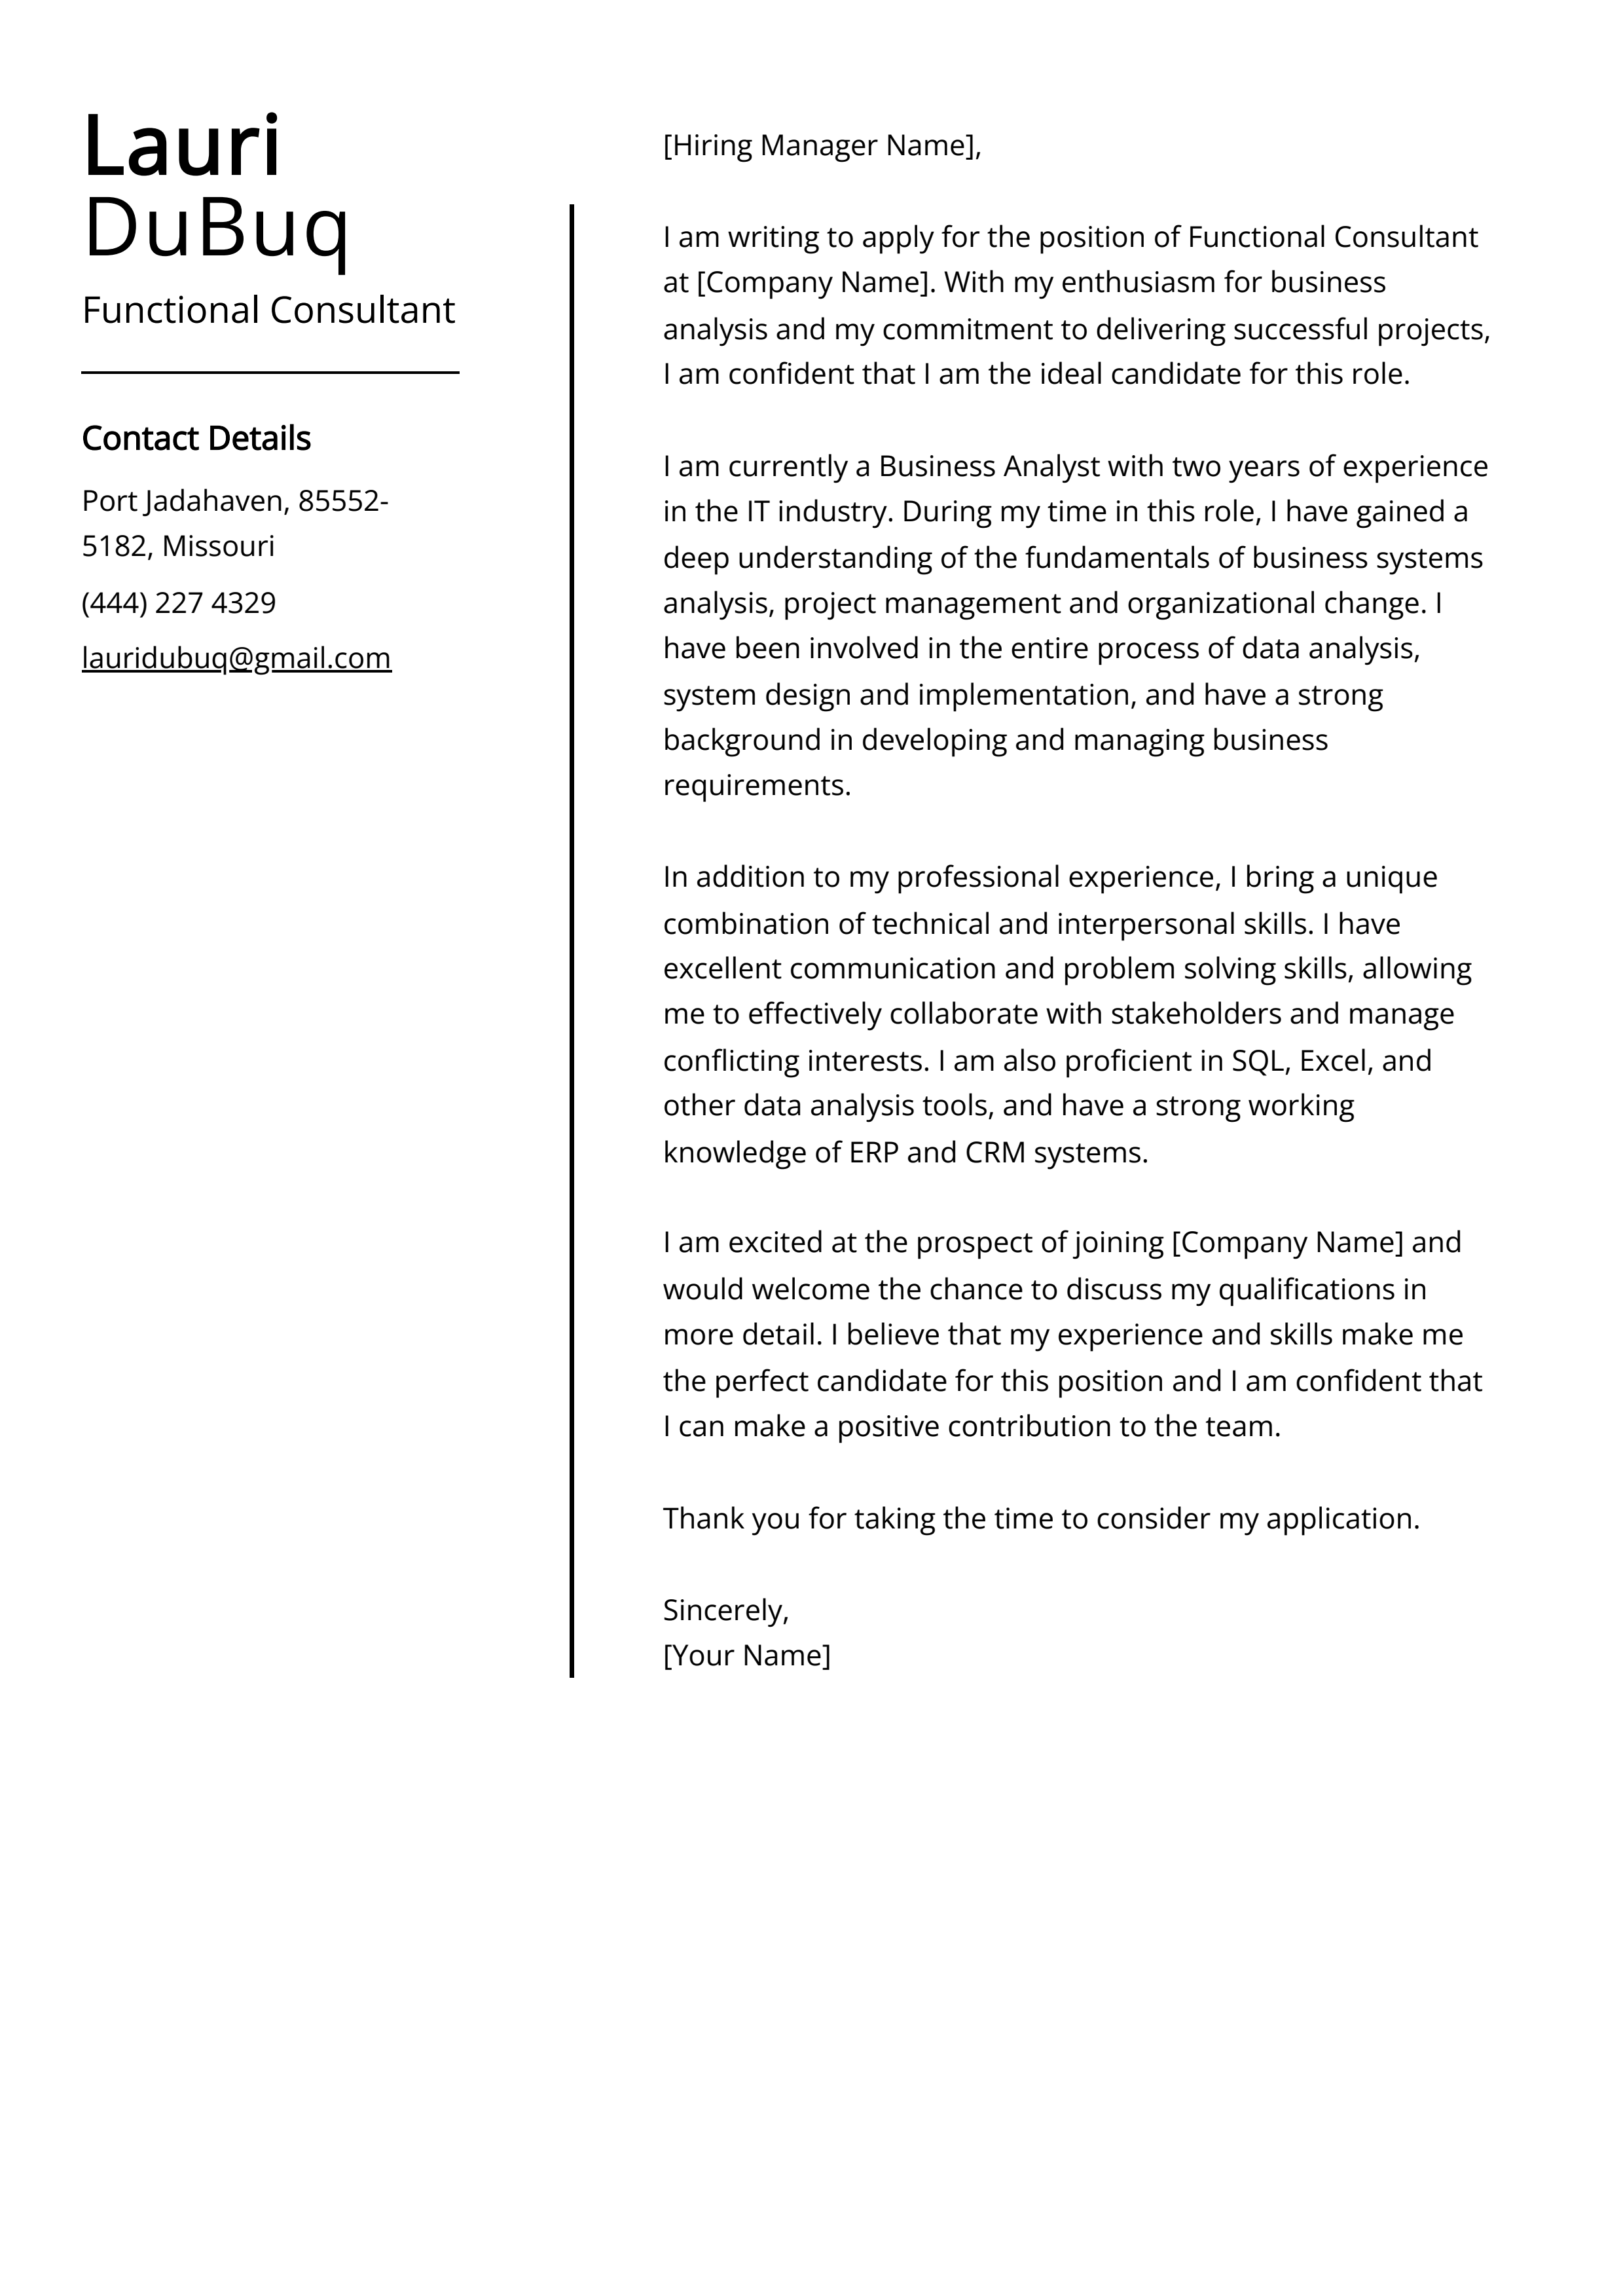 Functional Consultant Cover Letter Example